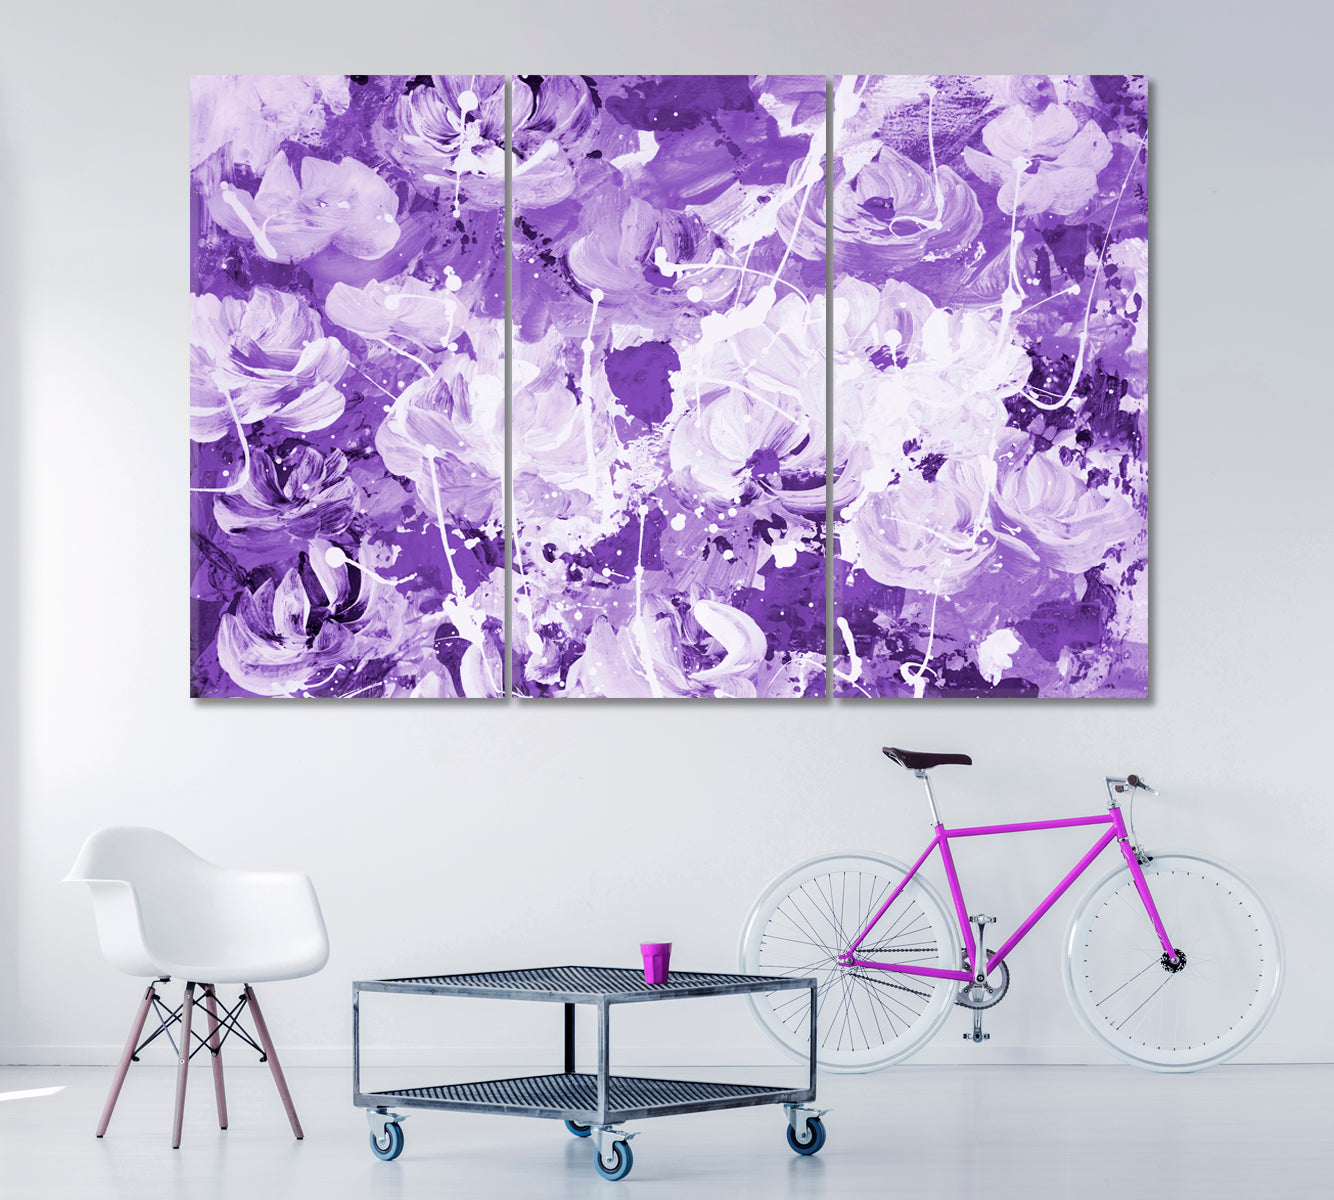 Violet Abstract Flowers Canvas Print ArtLexy 3 Panels 36"x24" inches 